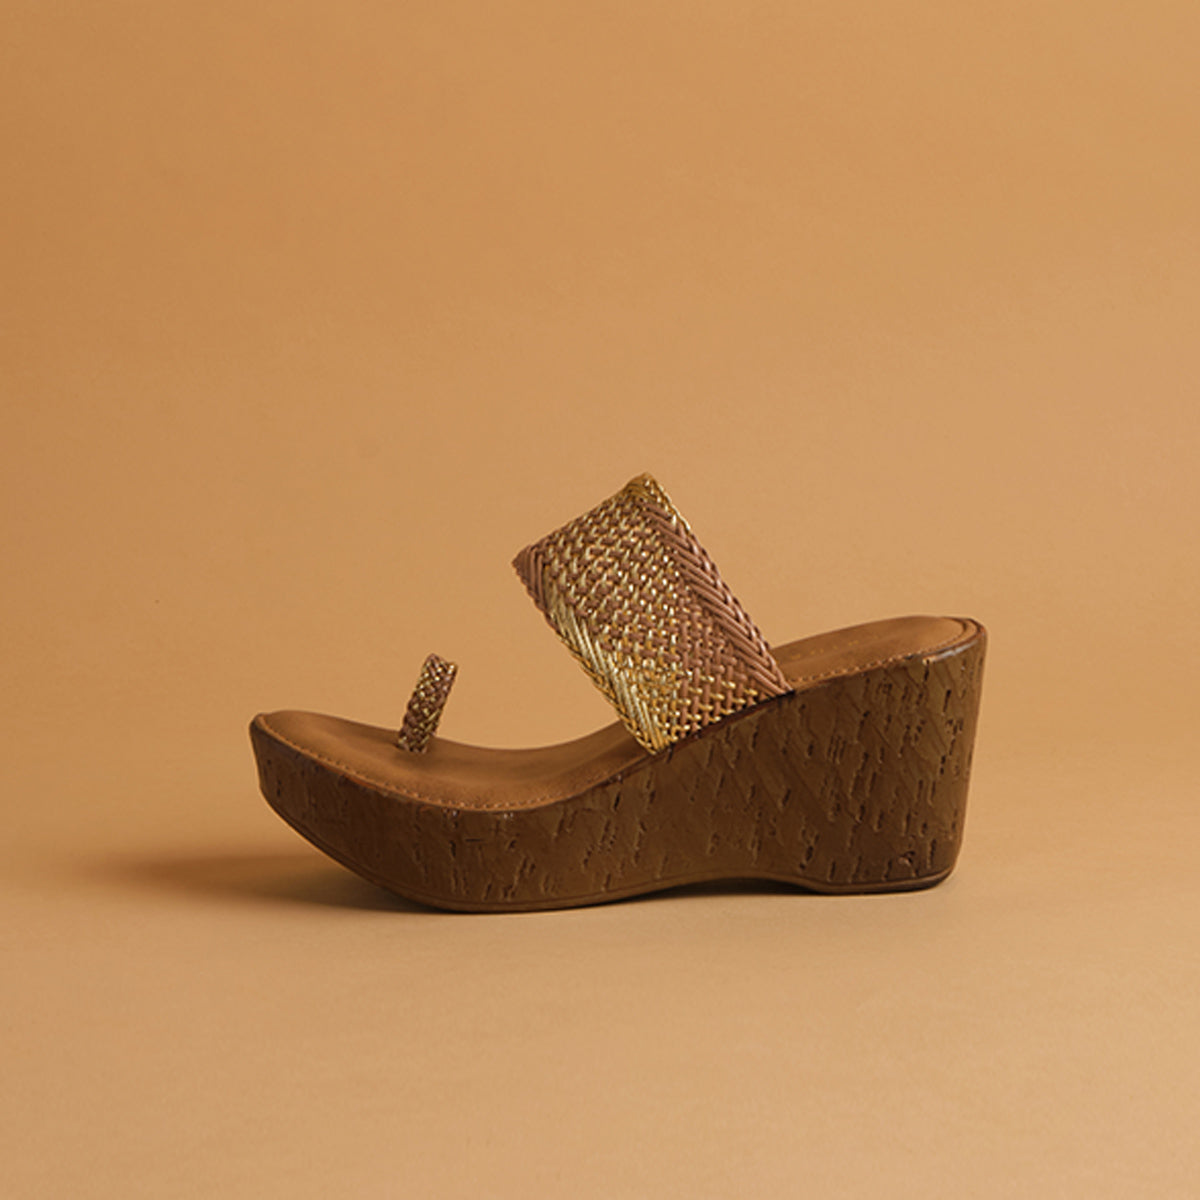 Cana Woven Wedges